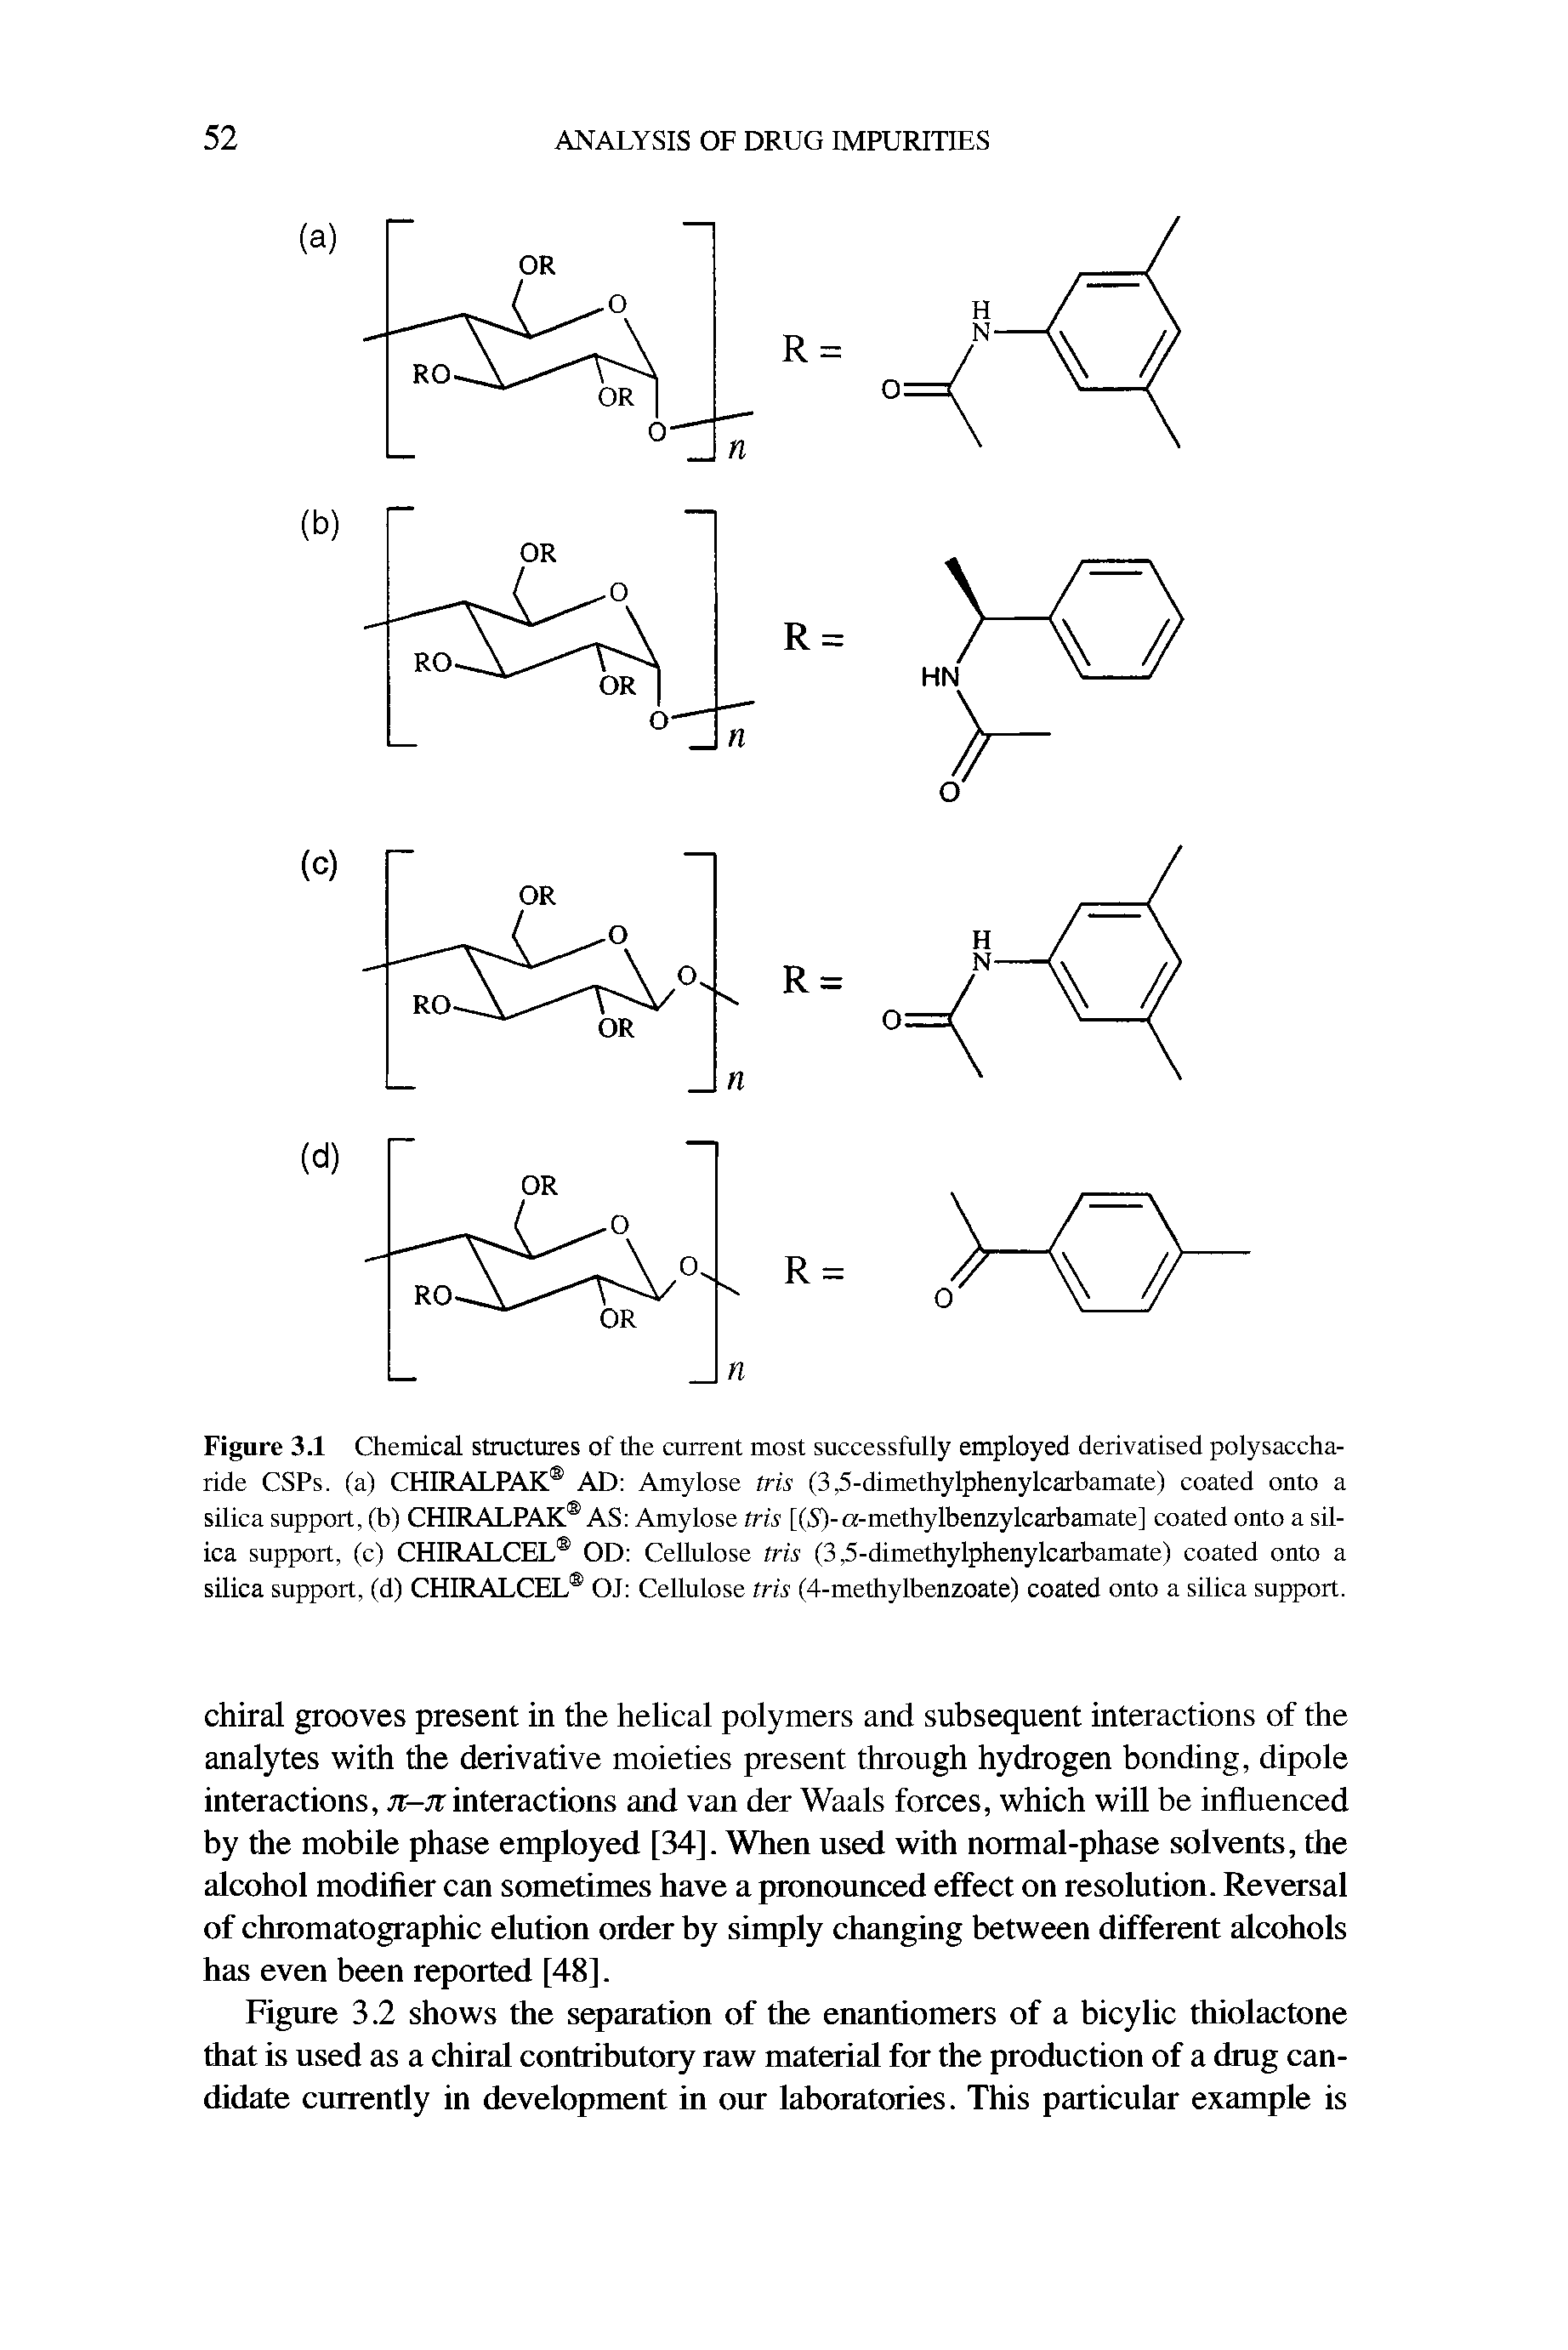 Figure 3.1 Chemical structures of the current most successfully employed derivatised polysaccharide CSPs. (a) CHIRALPAK AD Amylose tris (3,5-dimethylphenylcarbamate) coated onto a silica support, (b) CHIRALPAK AS Amylose tris [(S)-a-methylbenzylcarbamate] coated onto a silica support, (c) CHIRALCEL OD Cellulose tris (3,5-dimethylphenylcarbamate) coated onto a silica support, (d) CHIRALCEL OJ Cellulose tris (4-methylbenzoate) coated onto a silica support.